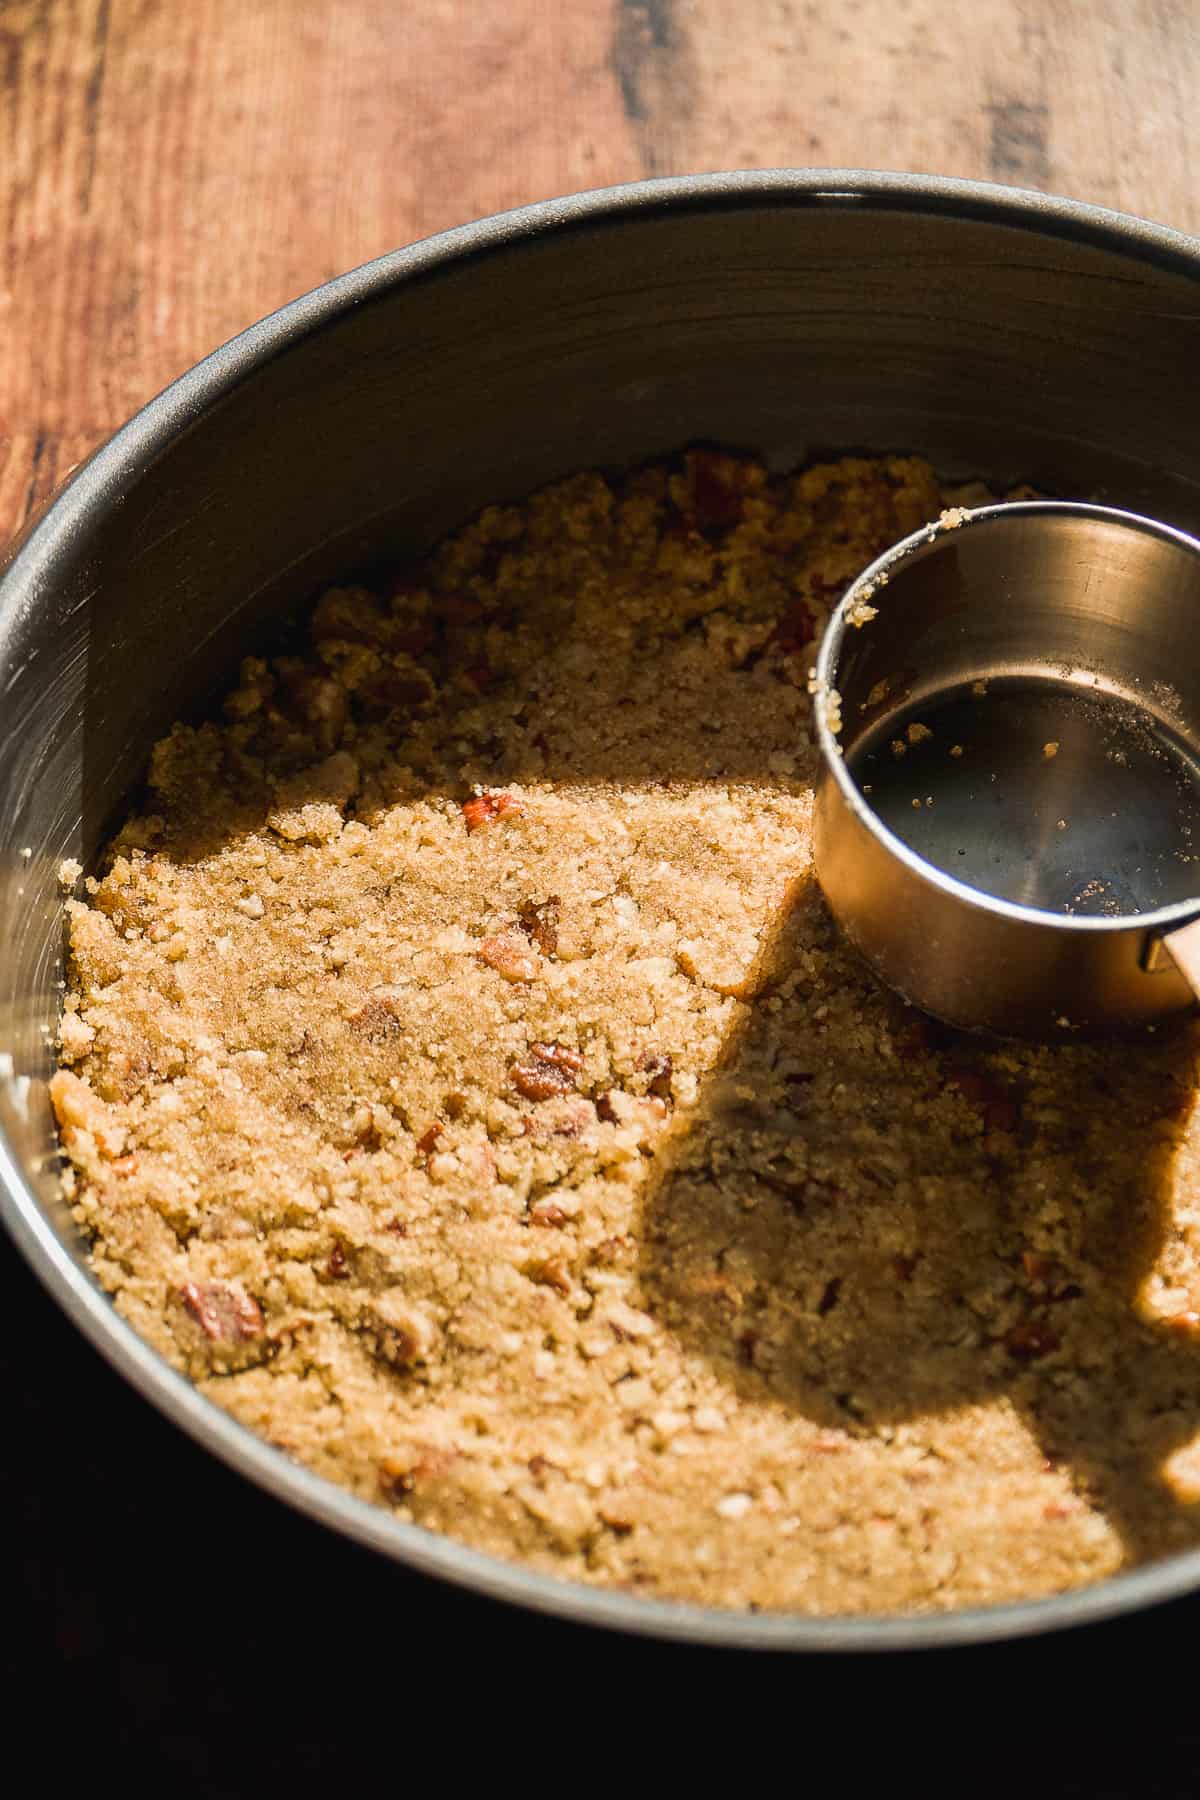 Pecan brown sugar mixture being packed into a cake pan.